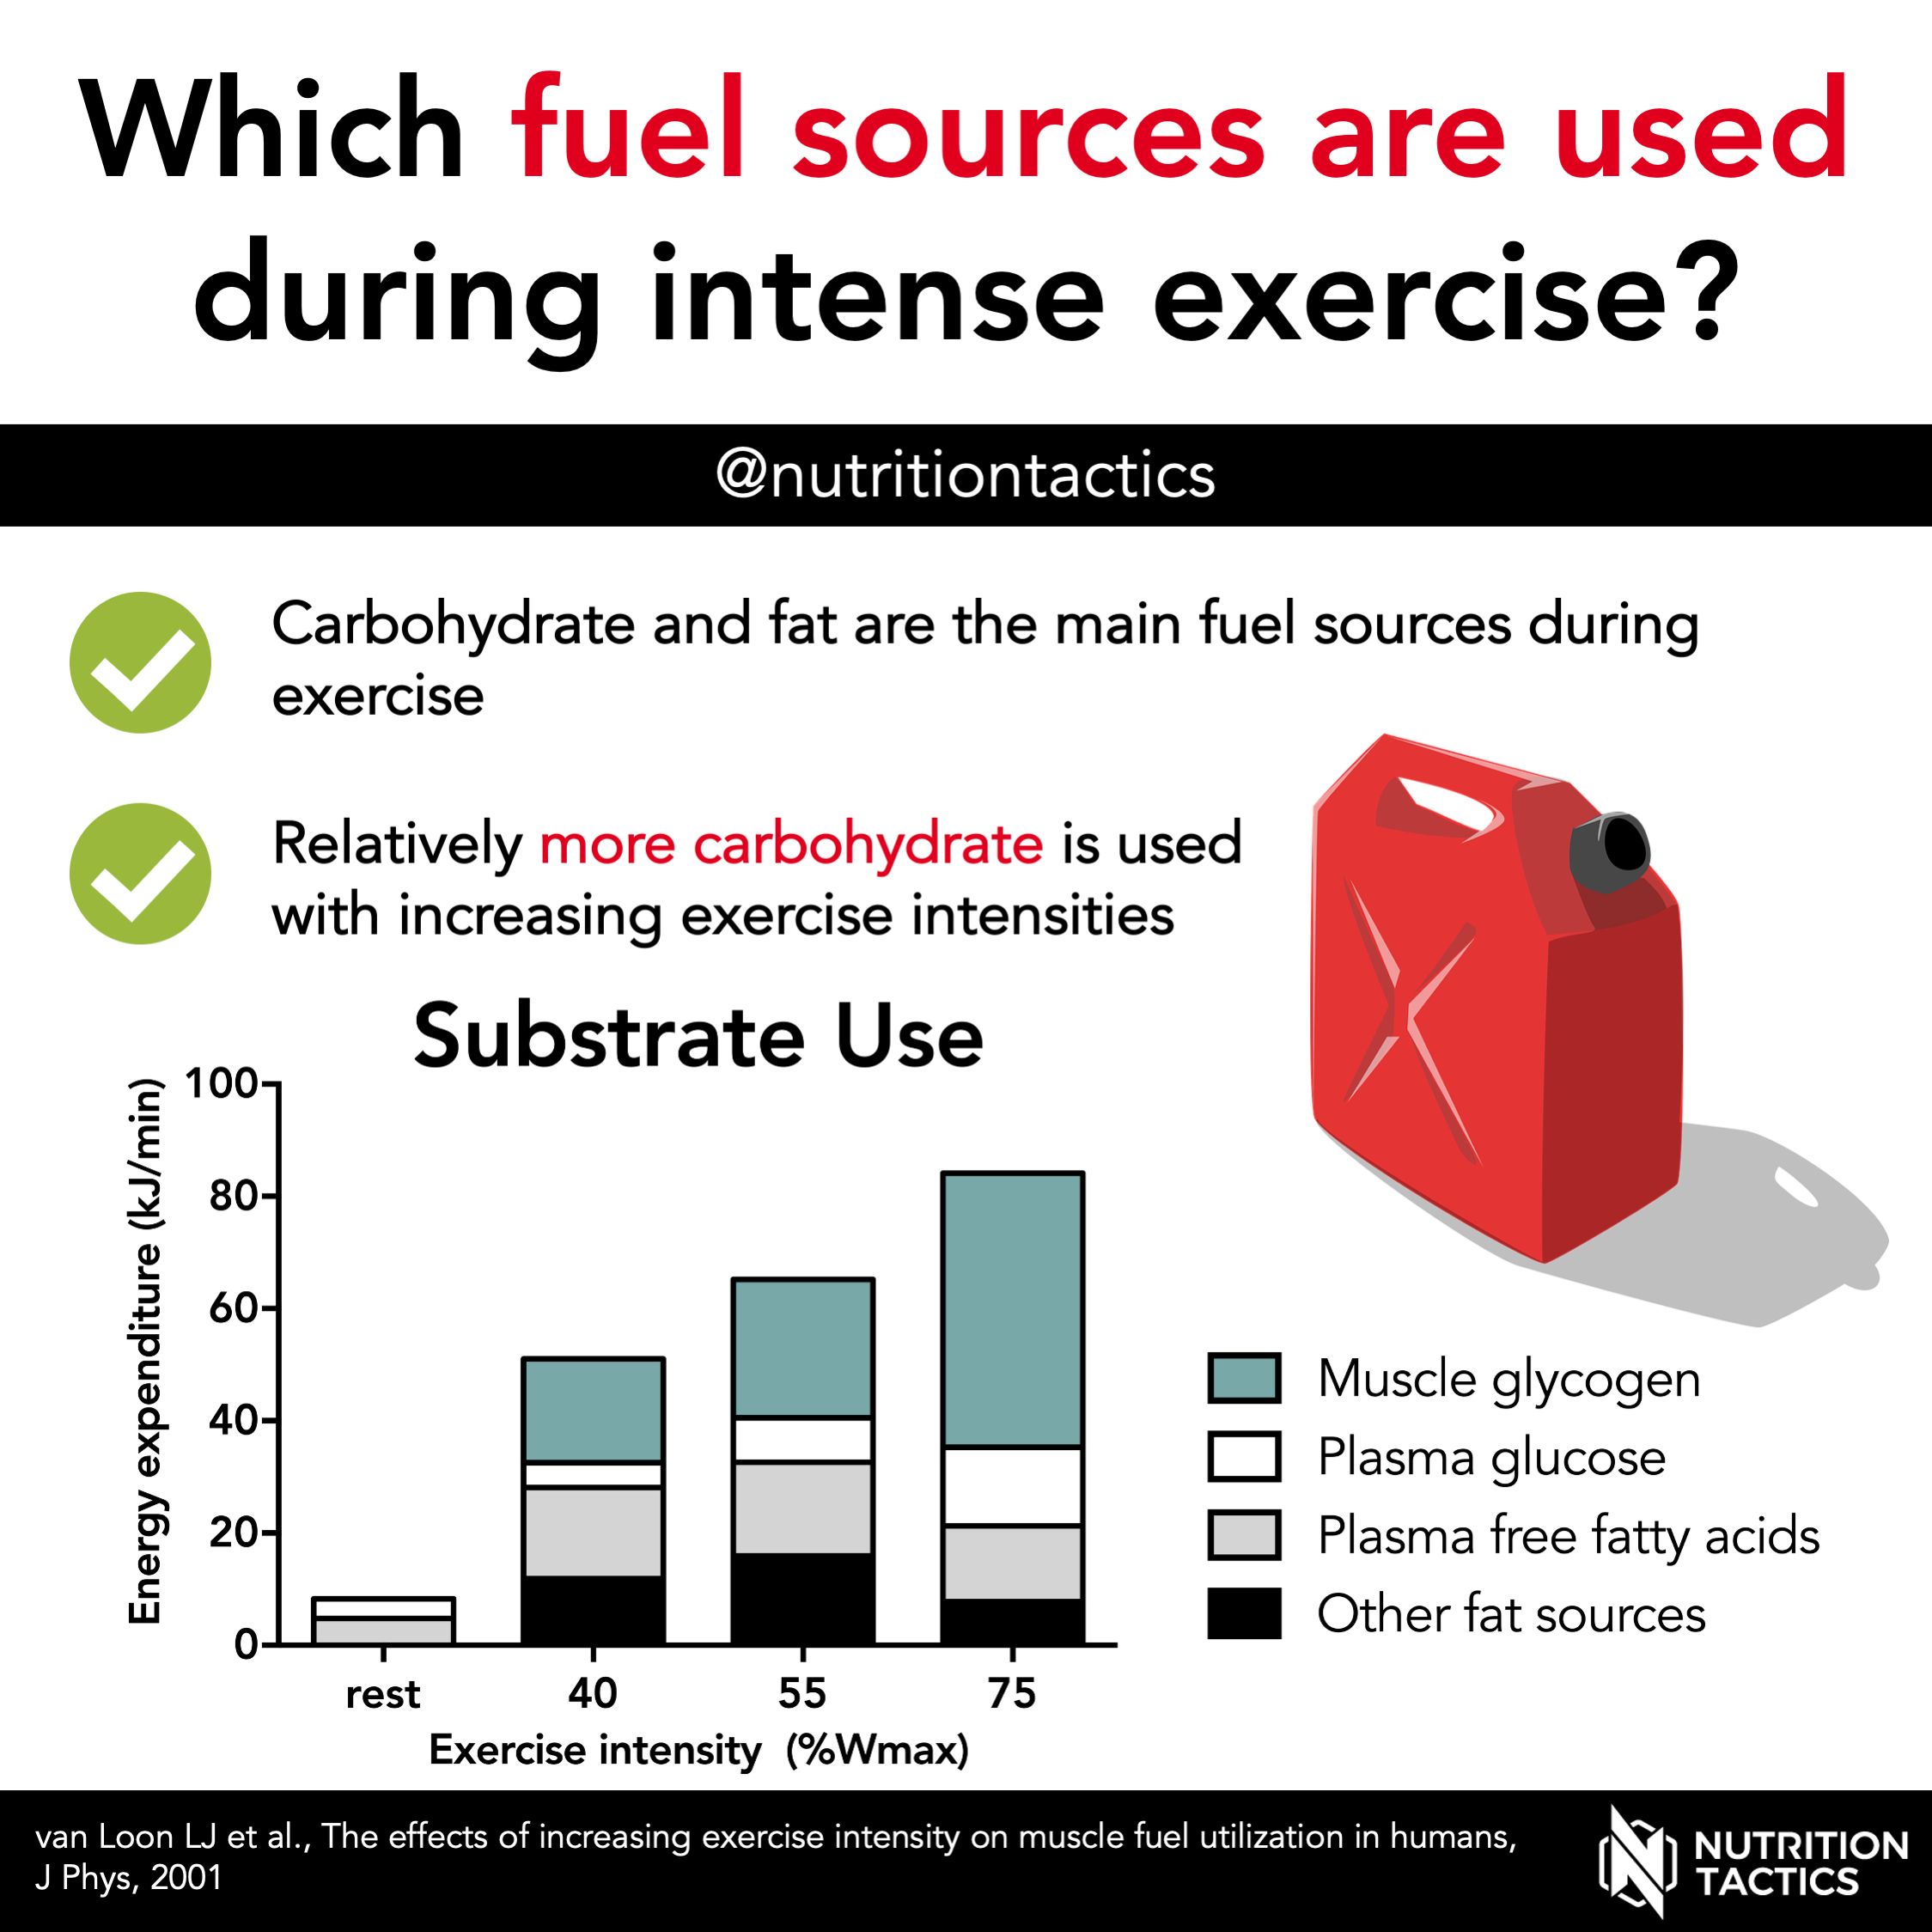 Muscular fuel sources